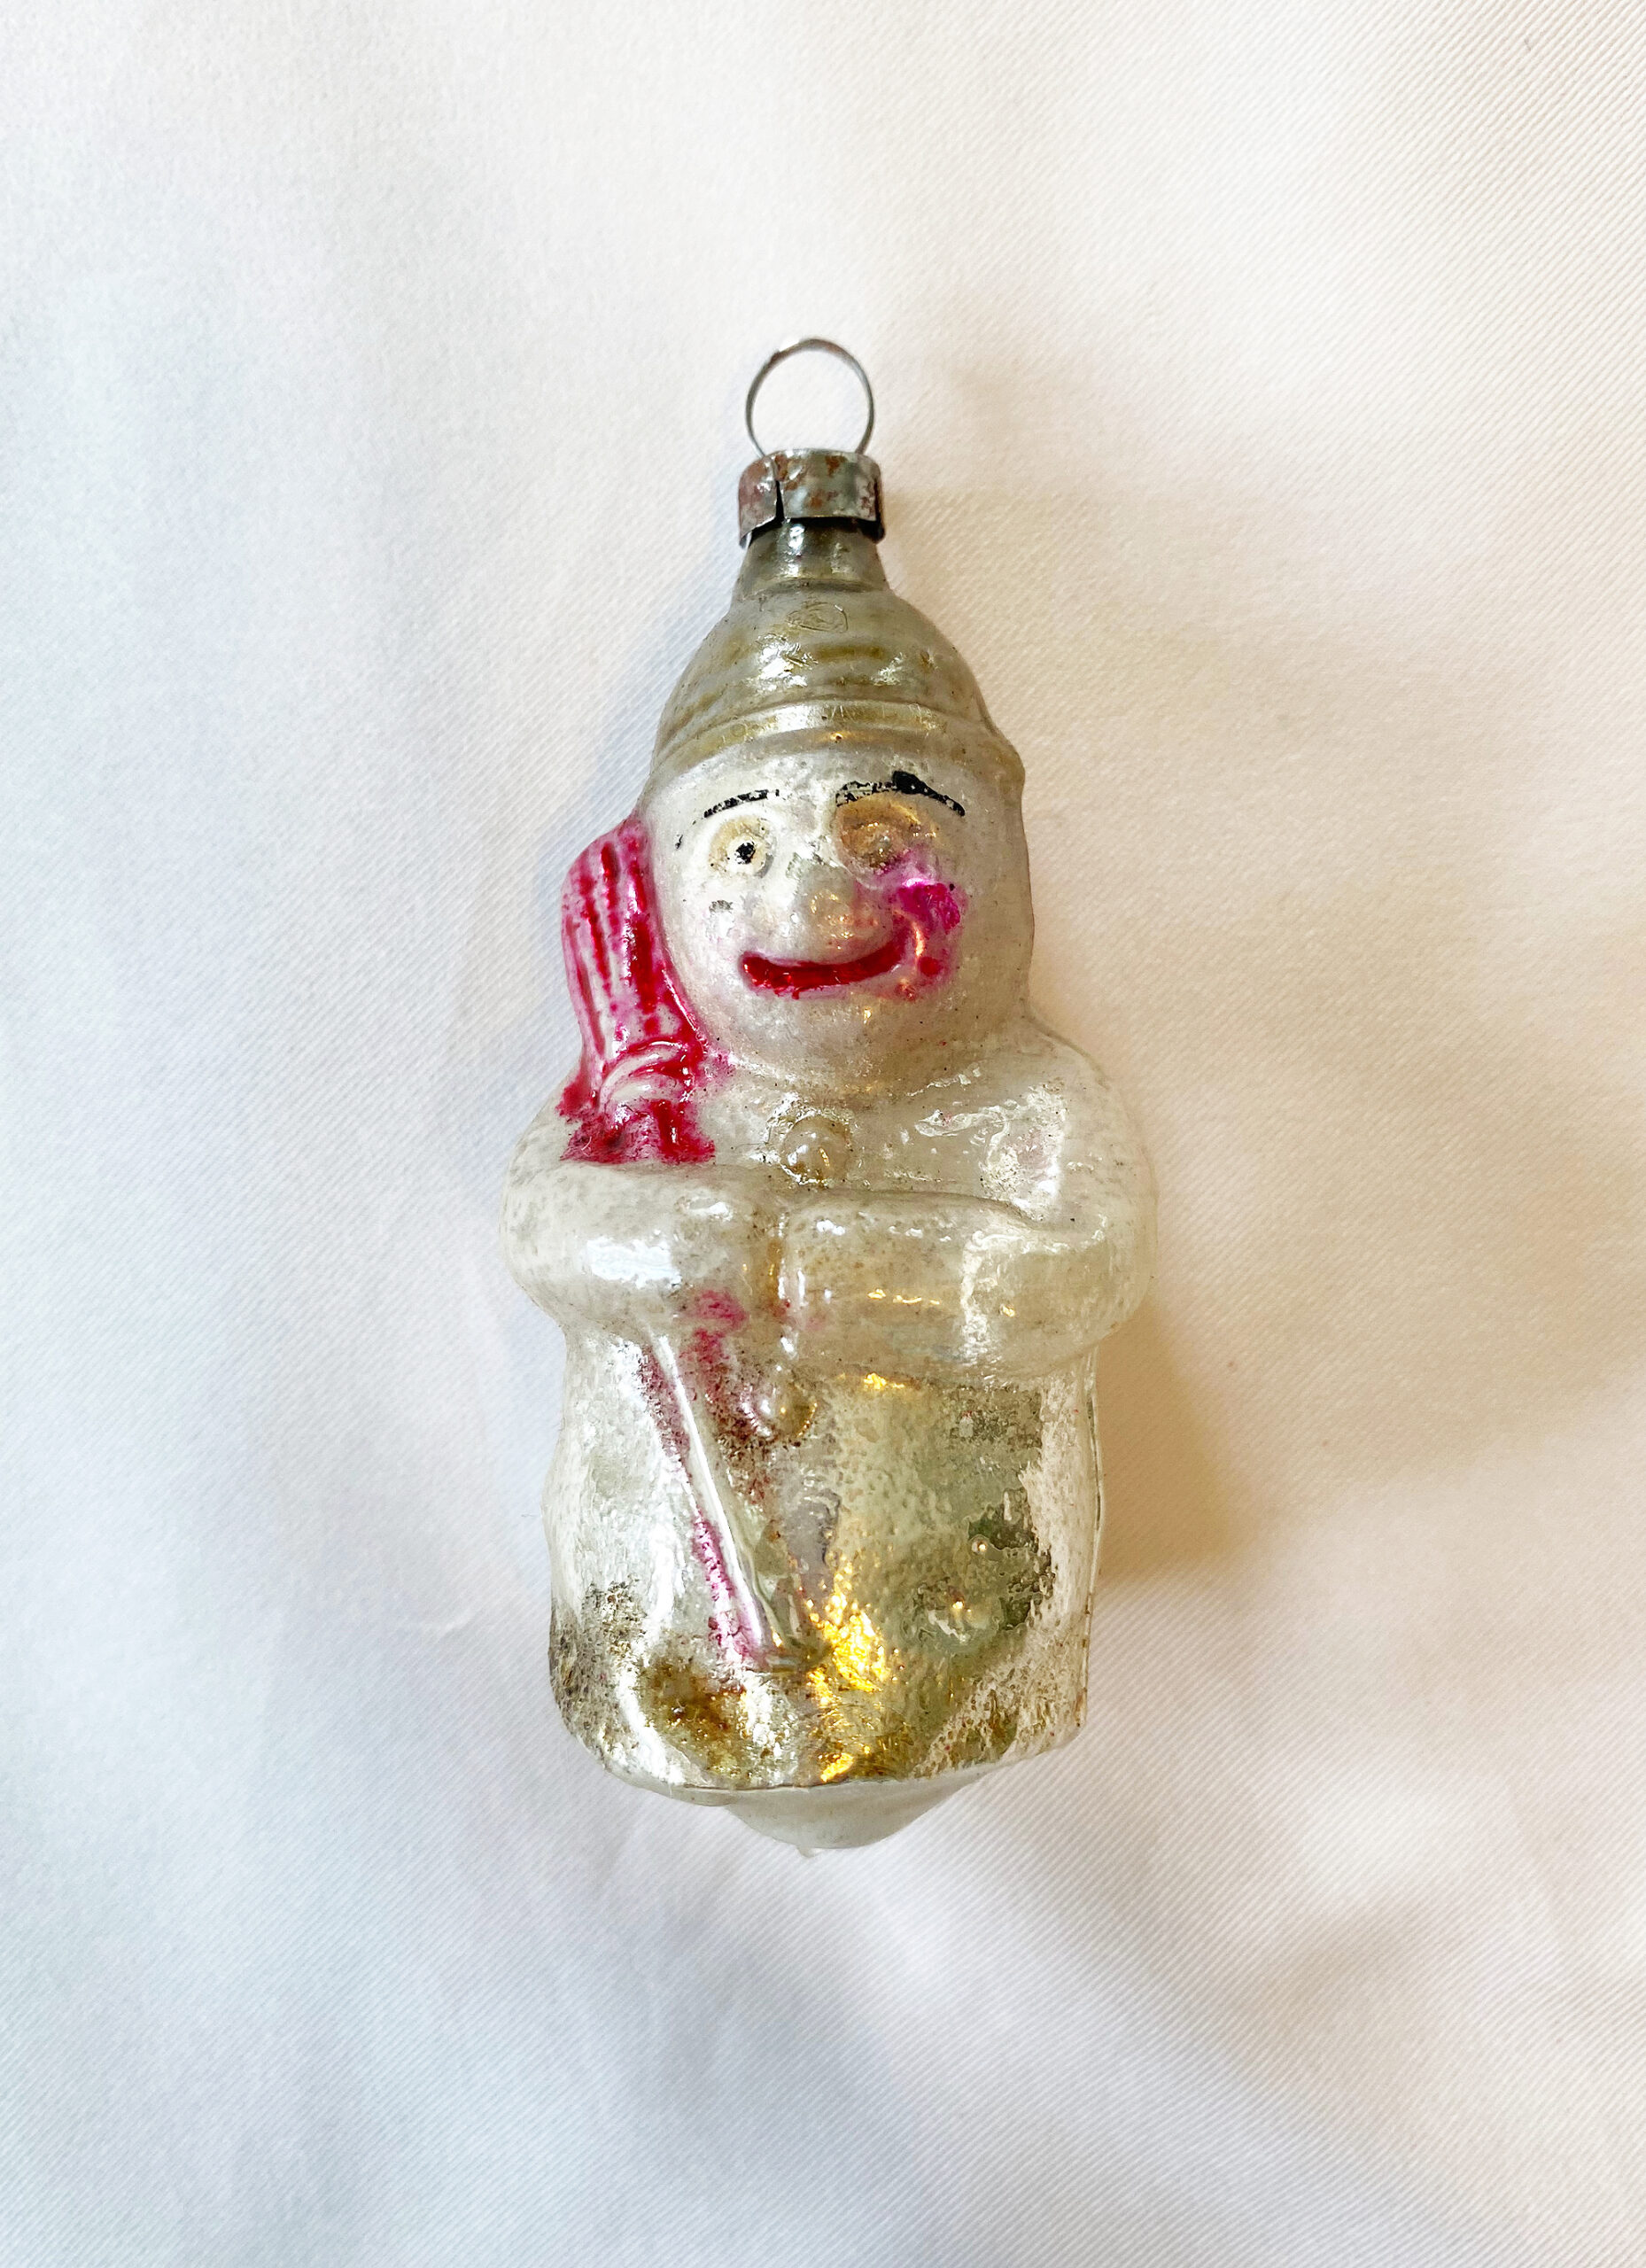 All Is Brite Christmas Hand Painted Glass Ornaments Snowman Vintage Design